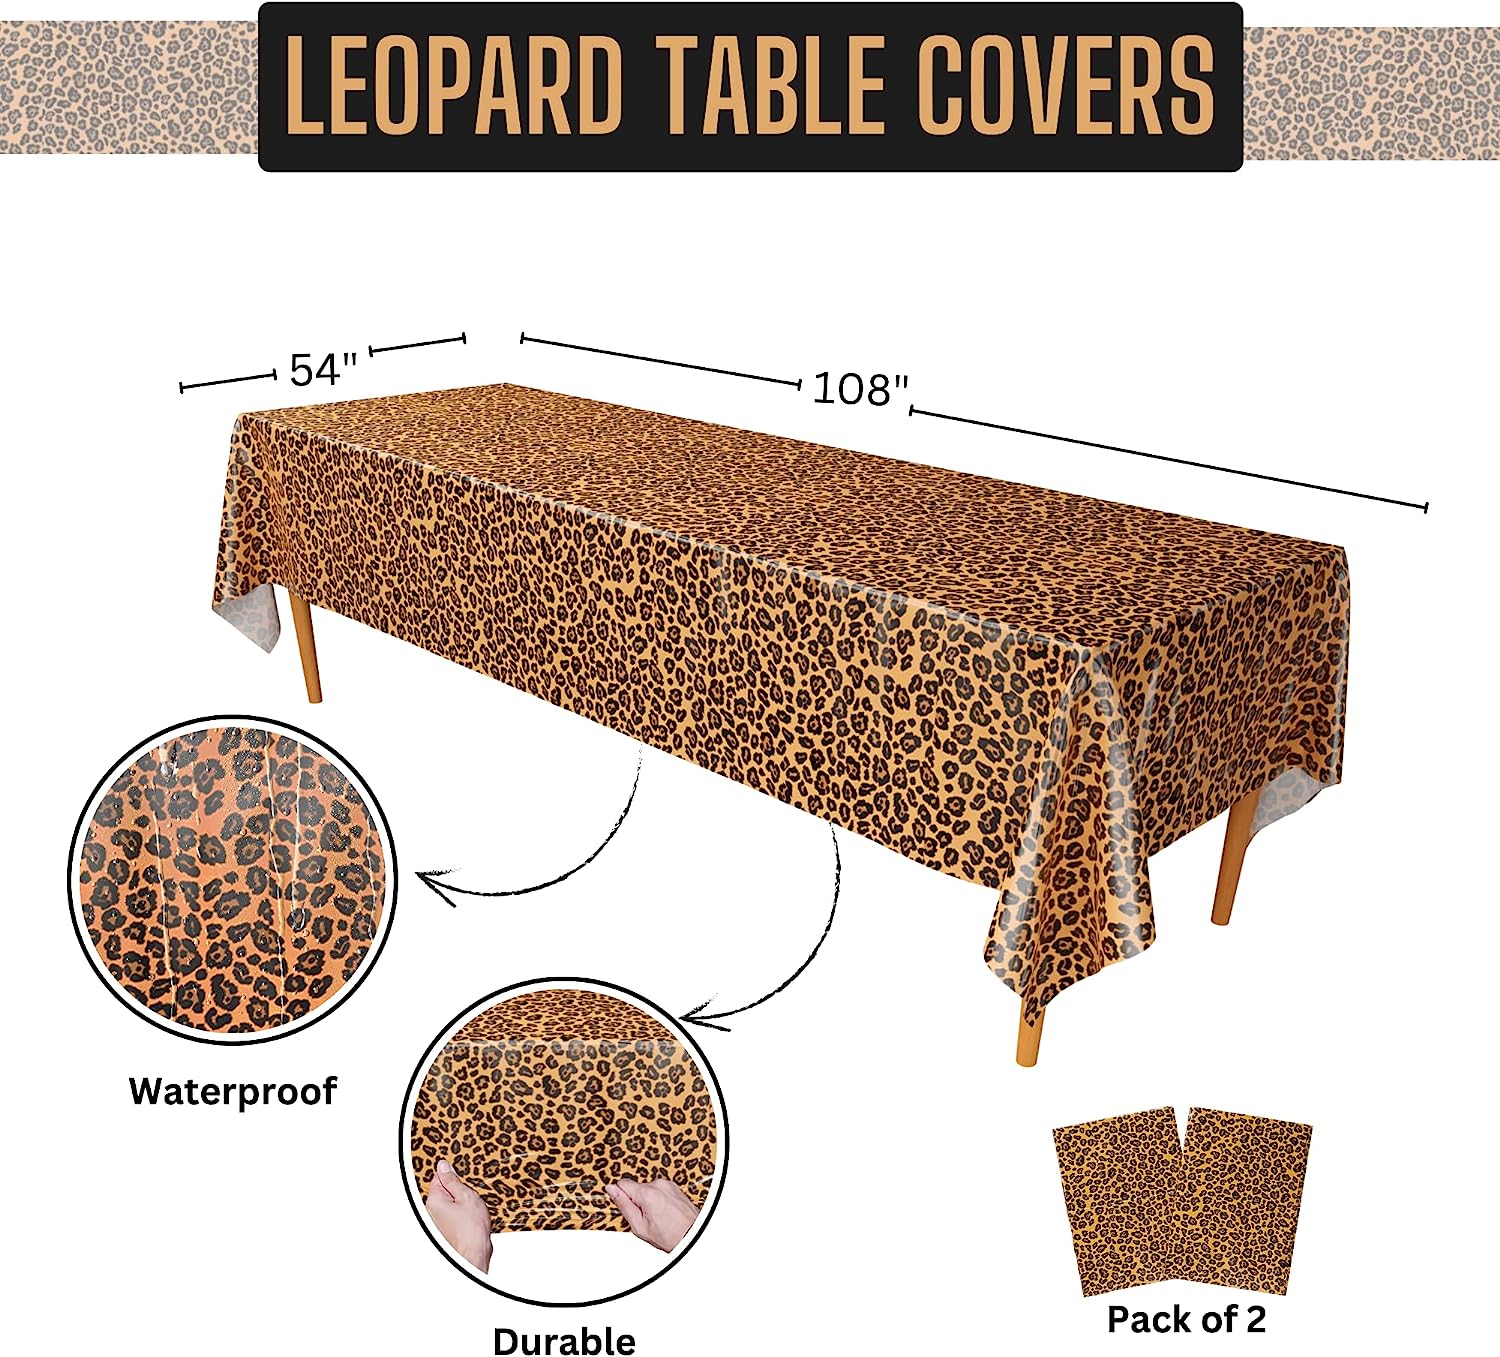 Waterproof and Durable plastic table covers are decorated with a fun leopard print design and are sure to turn ordinary tables into exciting leopard print decorations for parties and other special occasions!